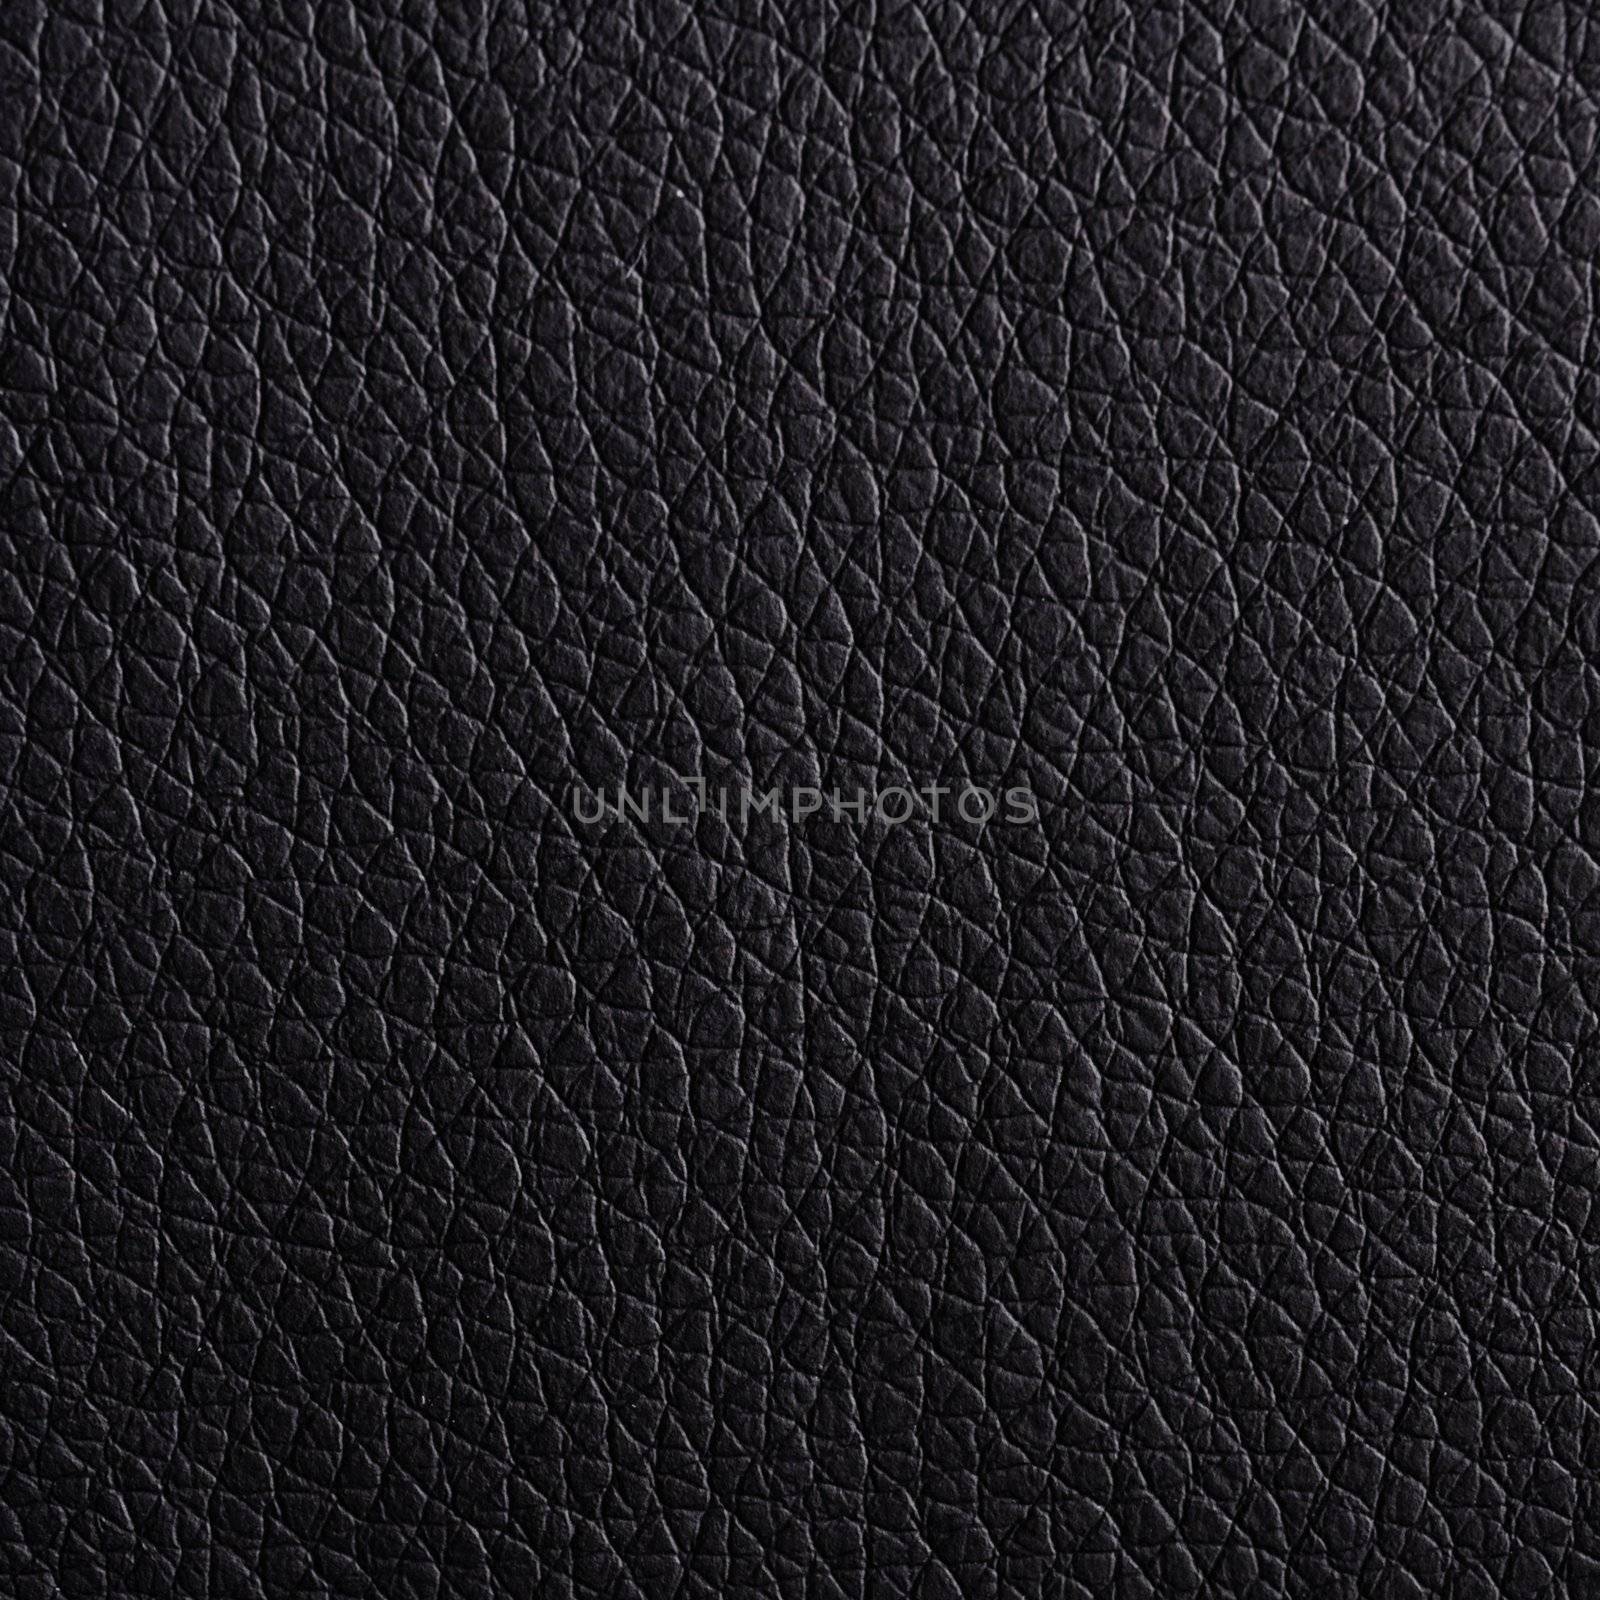 black leather texture background surface or wallpaper with copyspace